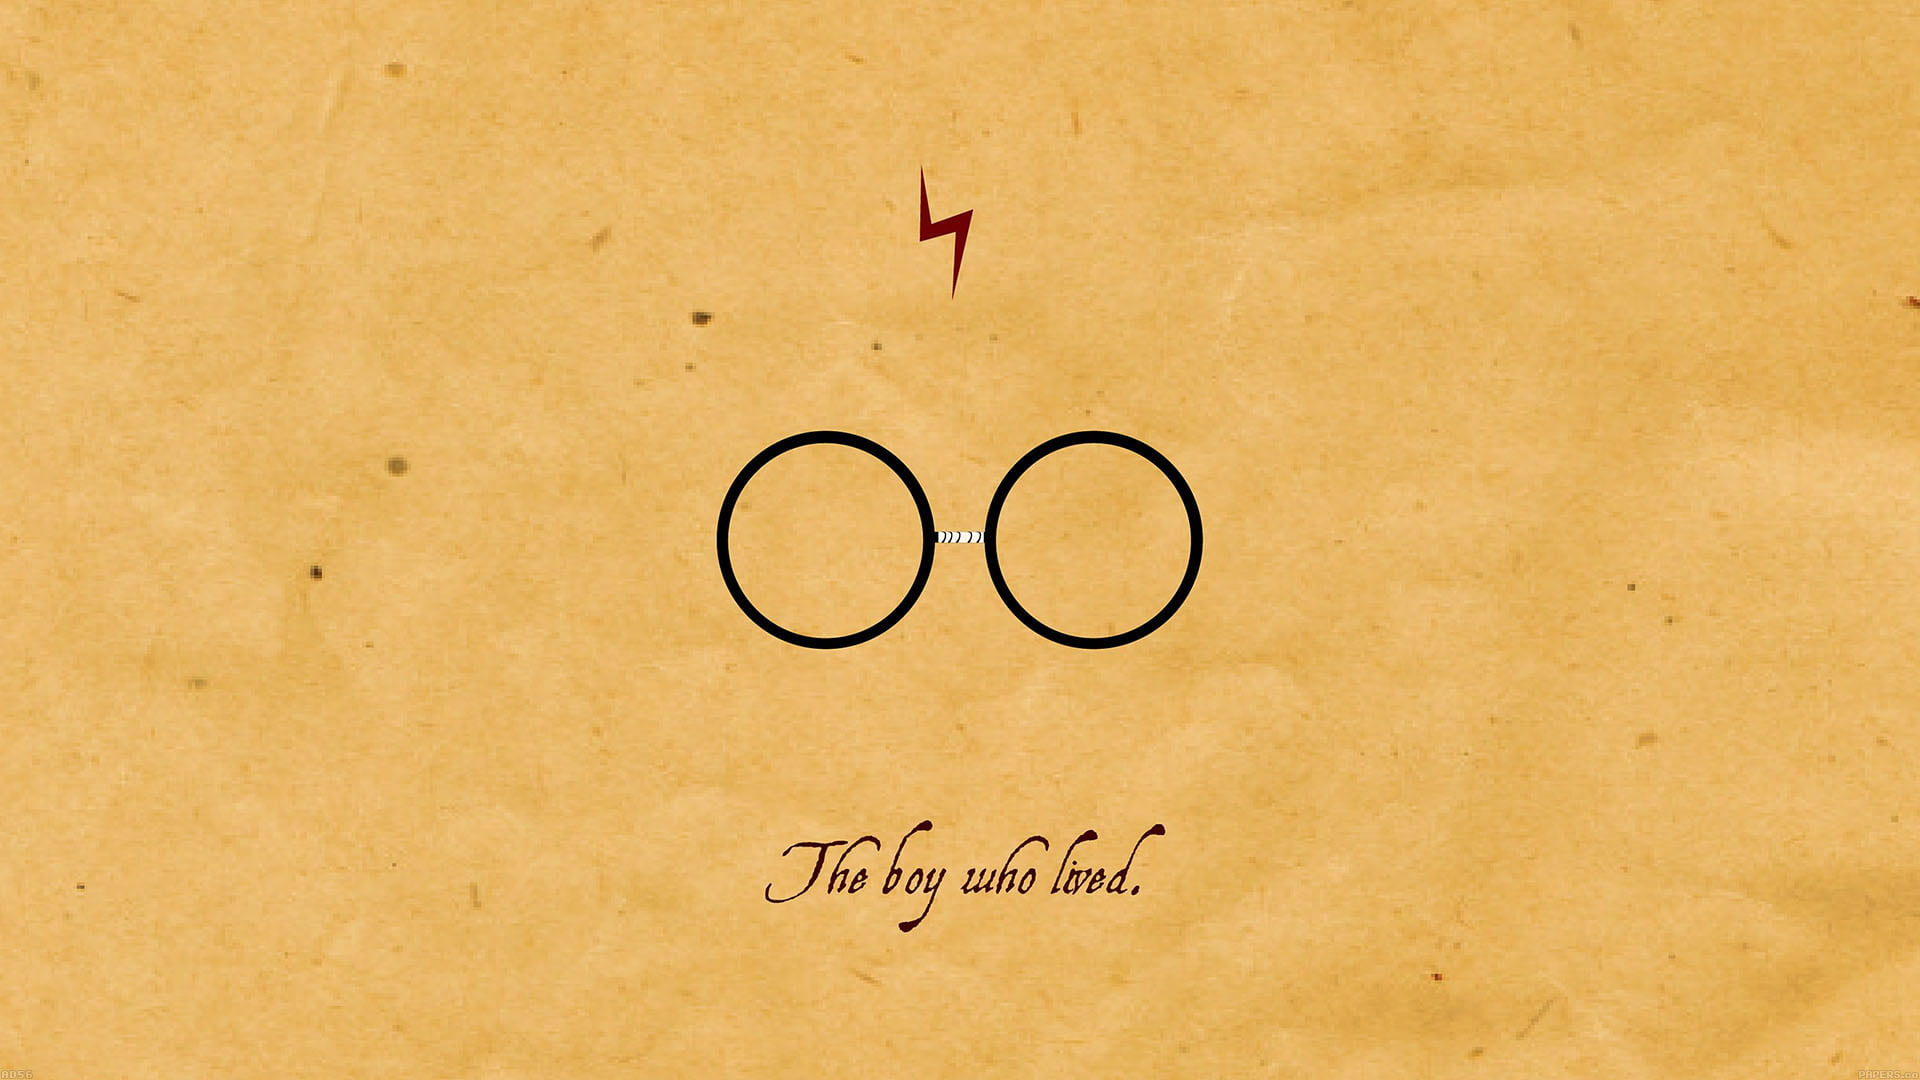 Harry Potter wallpaper and the Sorcerer's Stone